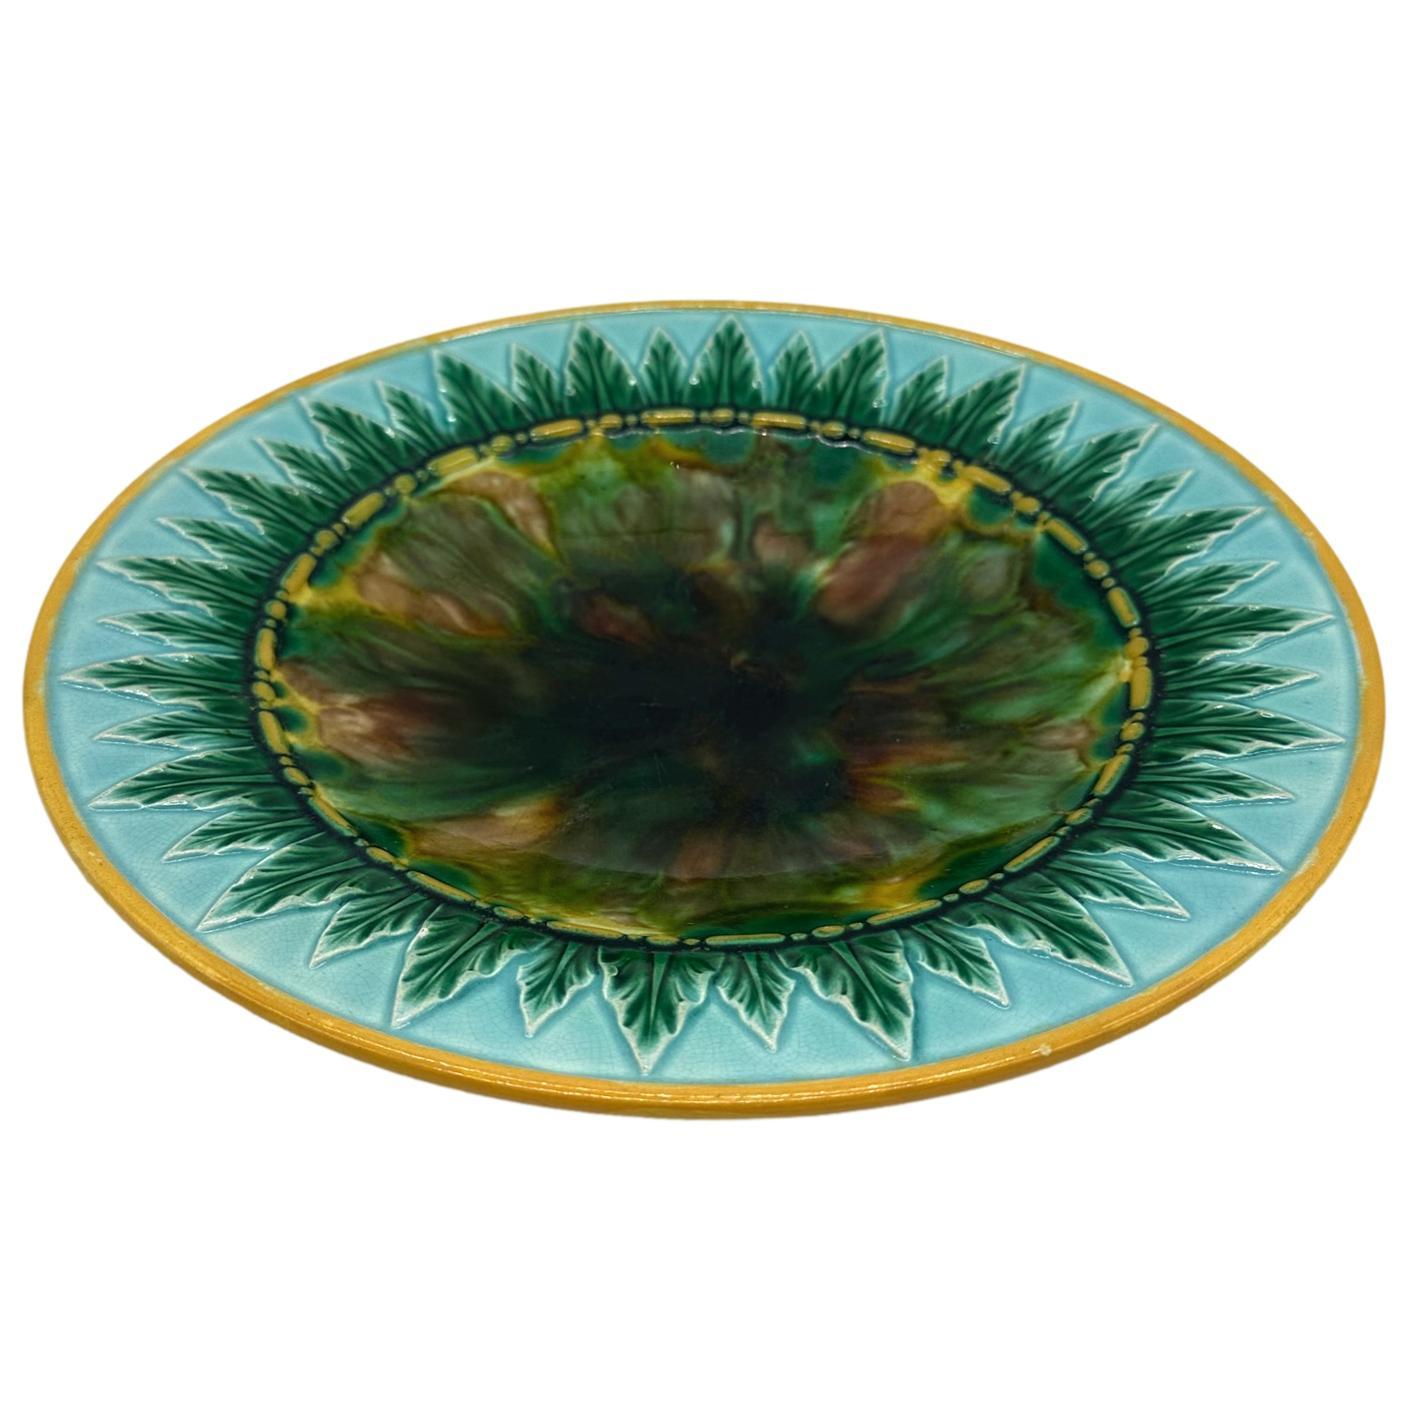 George Jones Majolica Dish, the center with tortoiseshell mottling, bordered with green-glazed acanthus leaves on a turquoise-glazed ground, the inner and outer border rims glazed in yellow ocher, the reverse with impressed 'GJ' monogram and painted